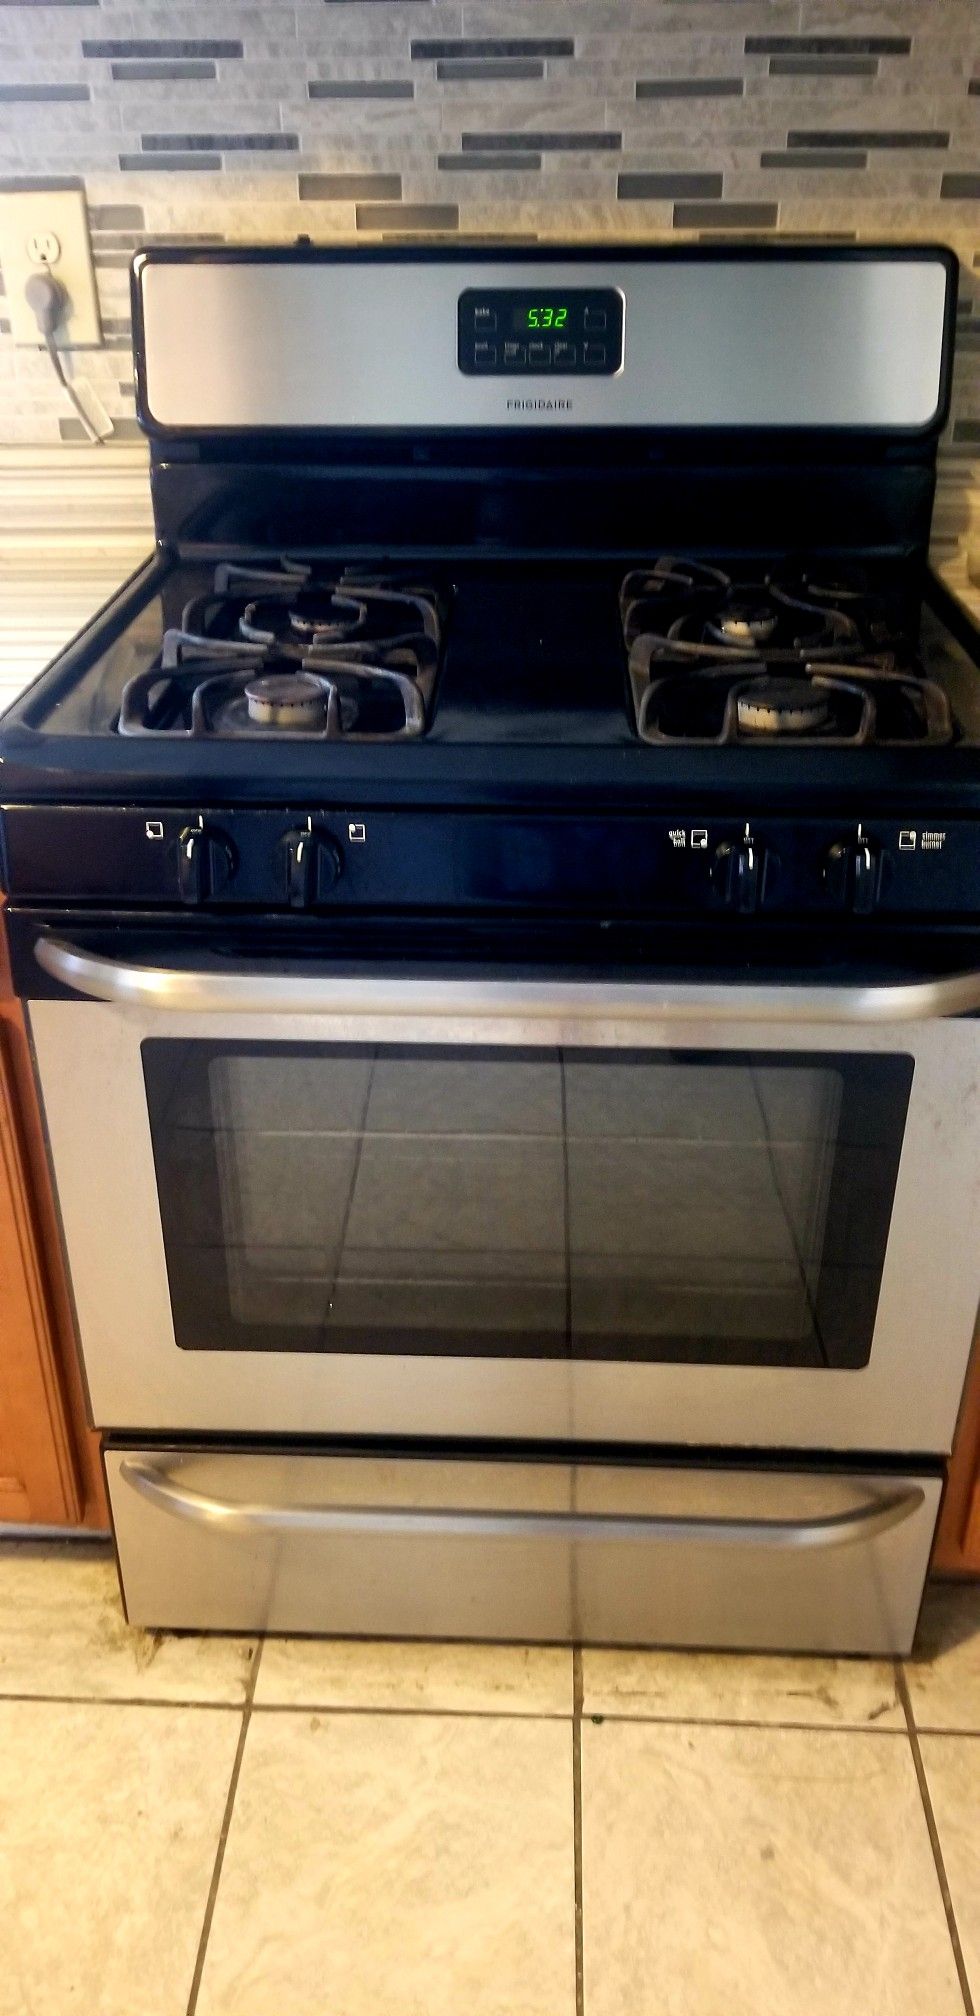 GAS STOVE, MICROWAVE AND DISHWASHER